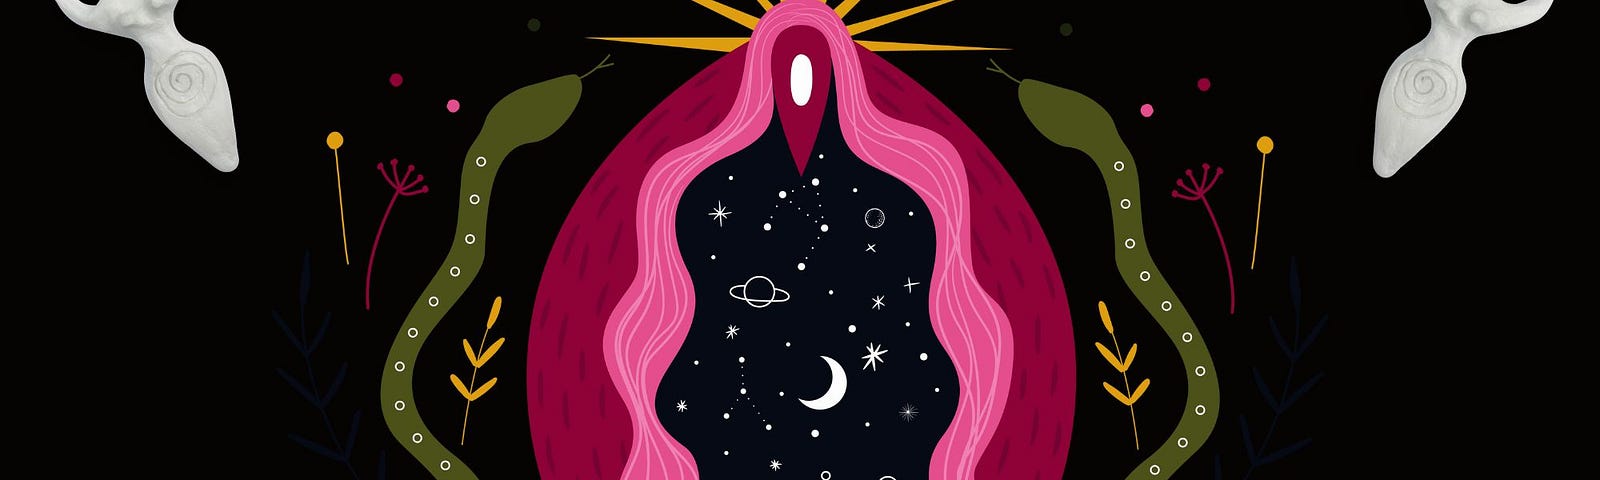 a collage of goddesses arrayed around an artistic holy pink Vulva, with a star at its peak and then nightime sky and sliver of cresent moon inside. Not vulgar or graphic, but vulvic, very tasteful.